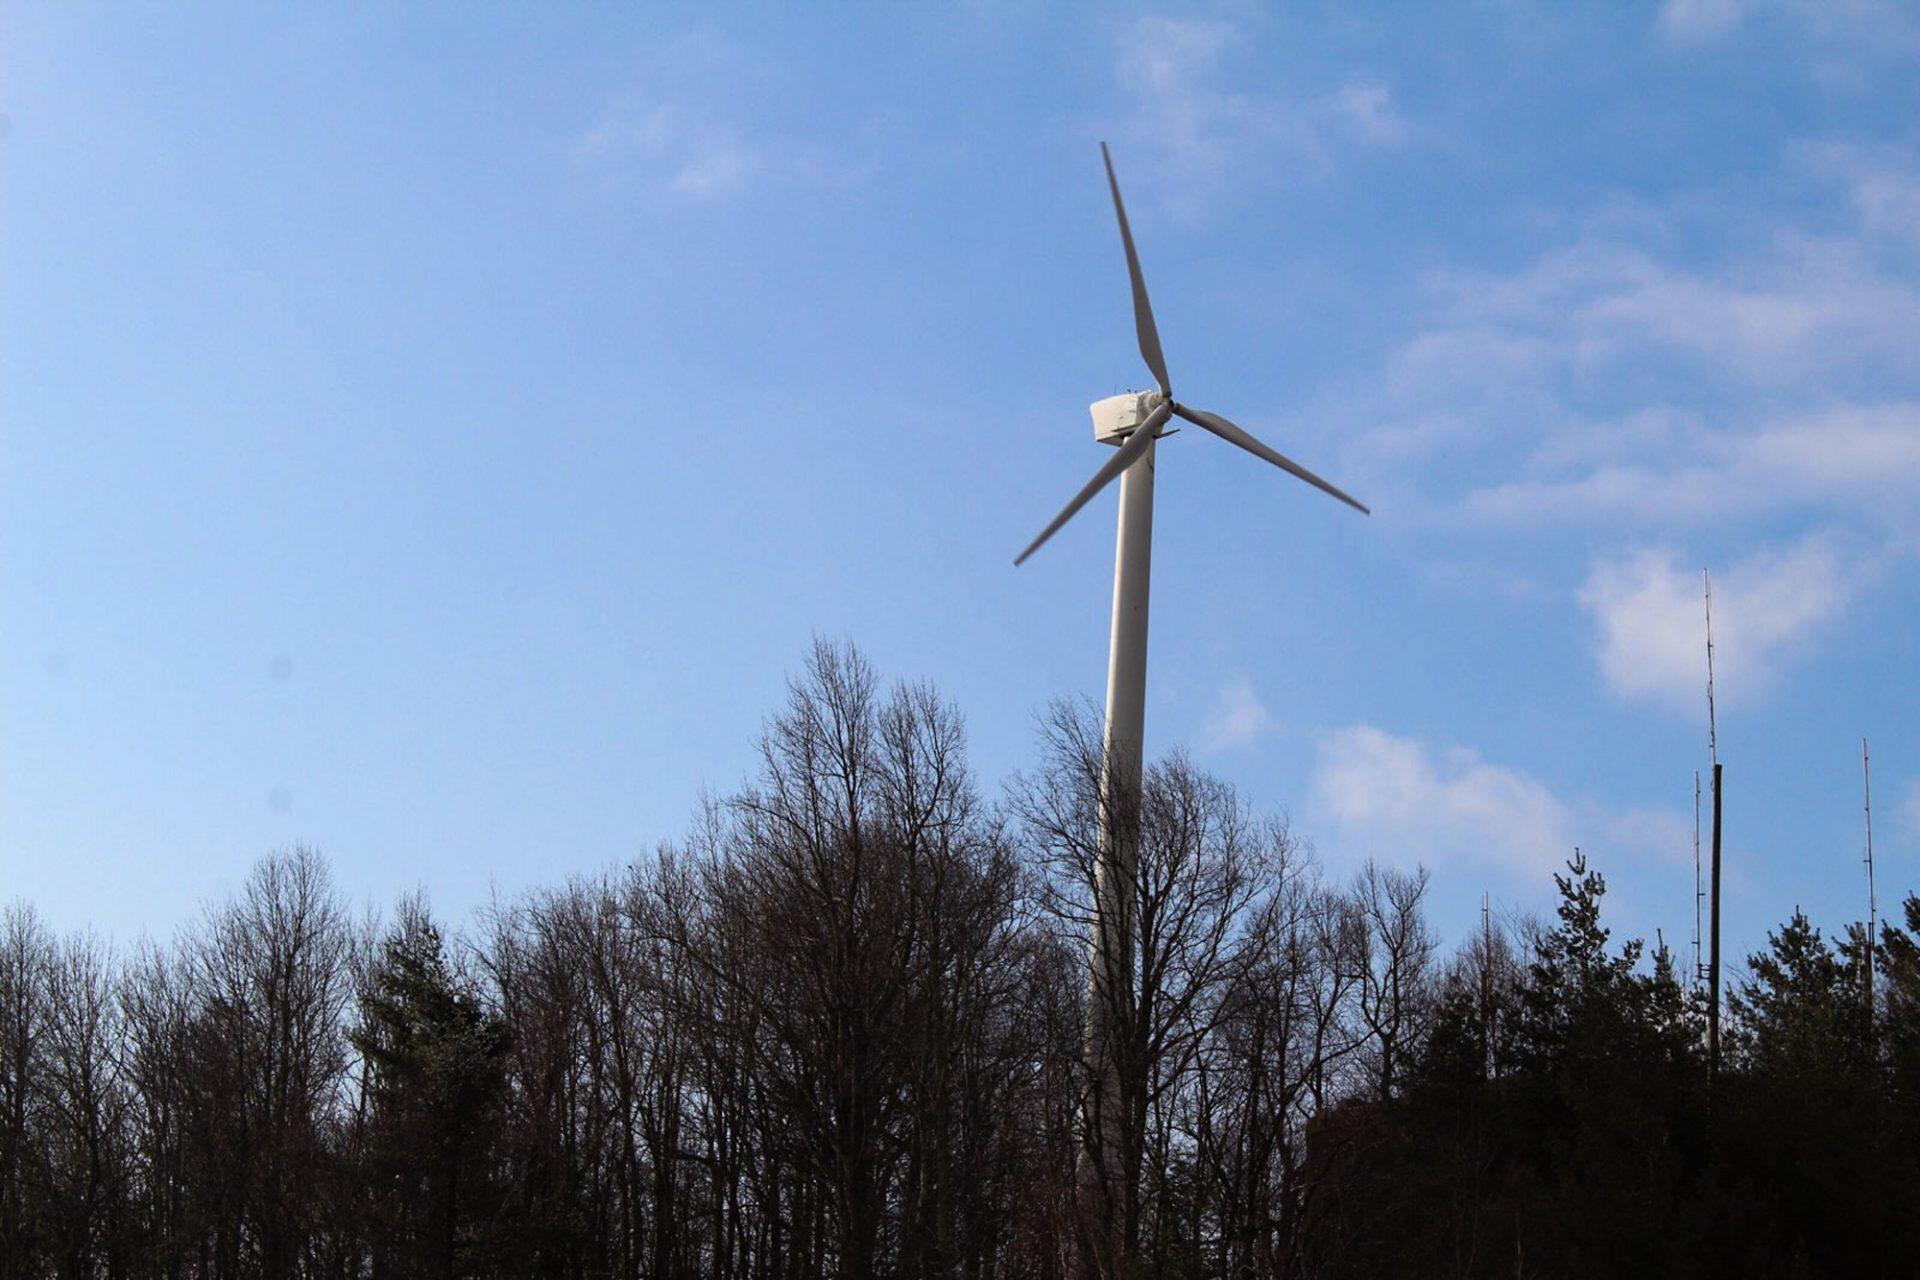 The+Broyhill+wind+turbine+at+Appalachian+State+was+installed+in+June+2009.+It+stands+at+the+highest+point+on+campus+at+755+Bodenheimer+Road.+The+turbine+allows+Appalachian+State+to+generate+energy+while+off-setting+200+metric+tons+of+carbon+dioxide+per+a+year.